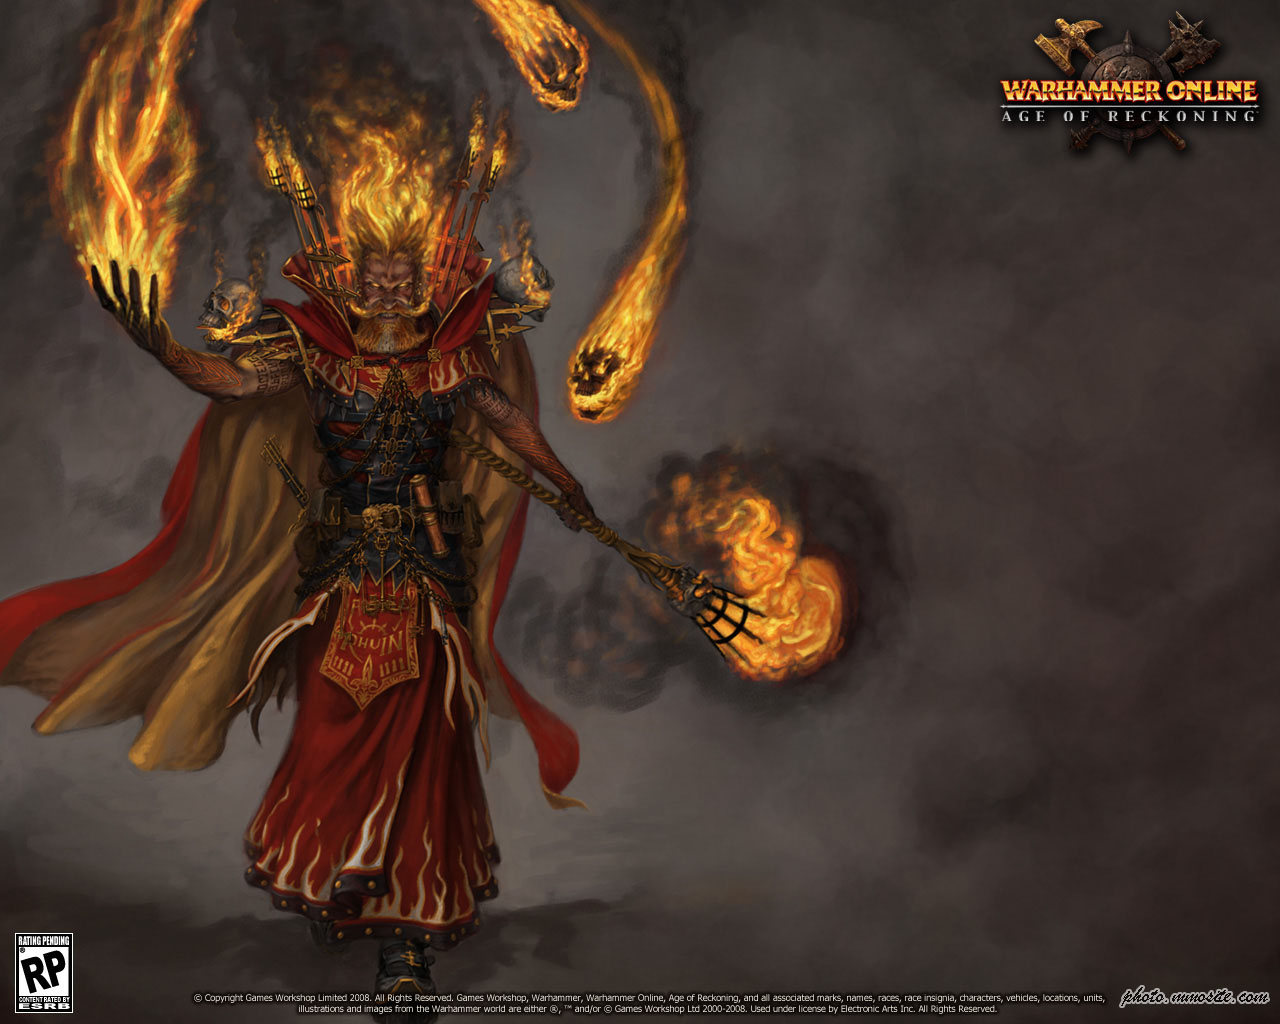 Bright Wizard Warhammer Online Wallpaper Click Here For Full Image